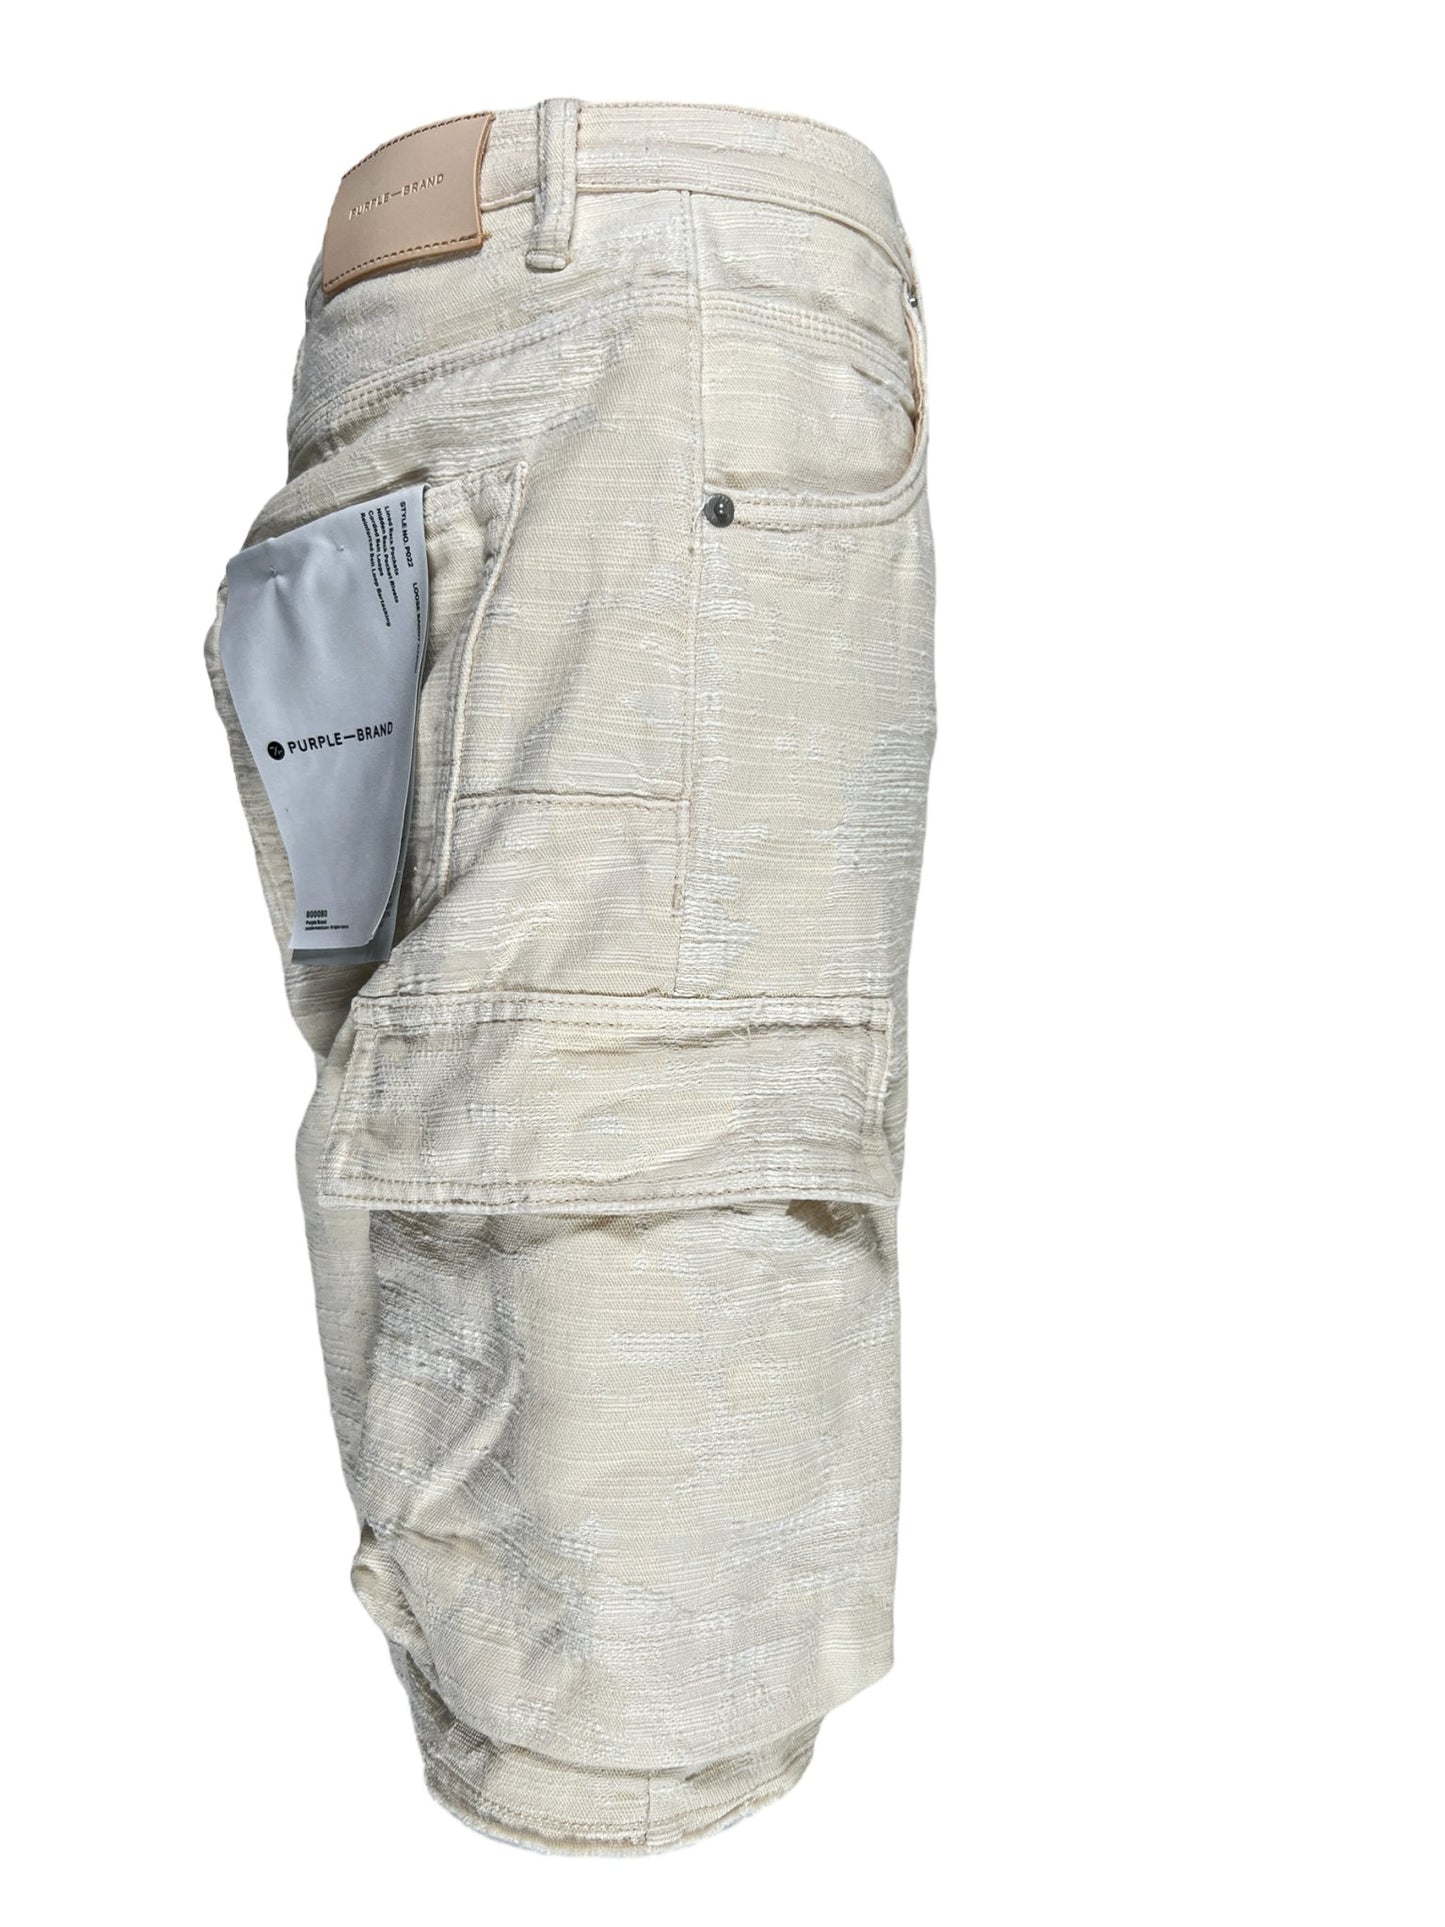 A pair of PURPLE BRAND P022-JCSW Jacquard cargo shorts with pockets on a white background.